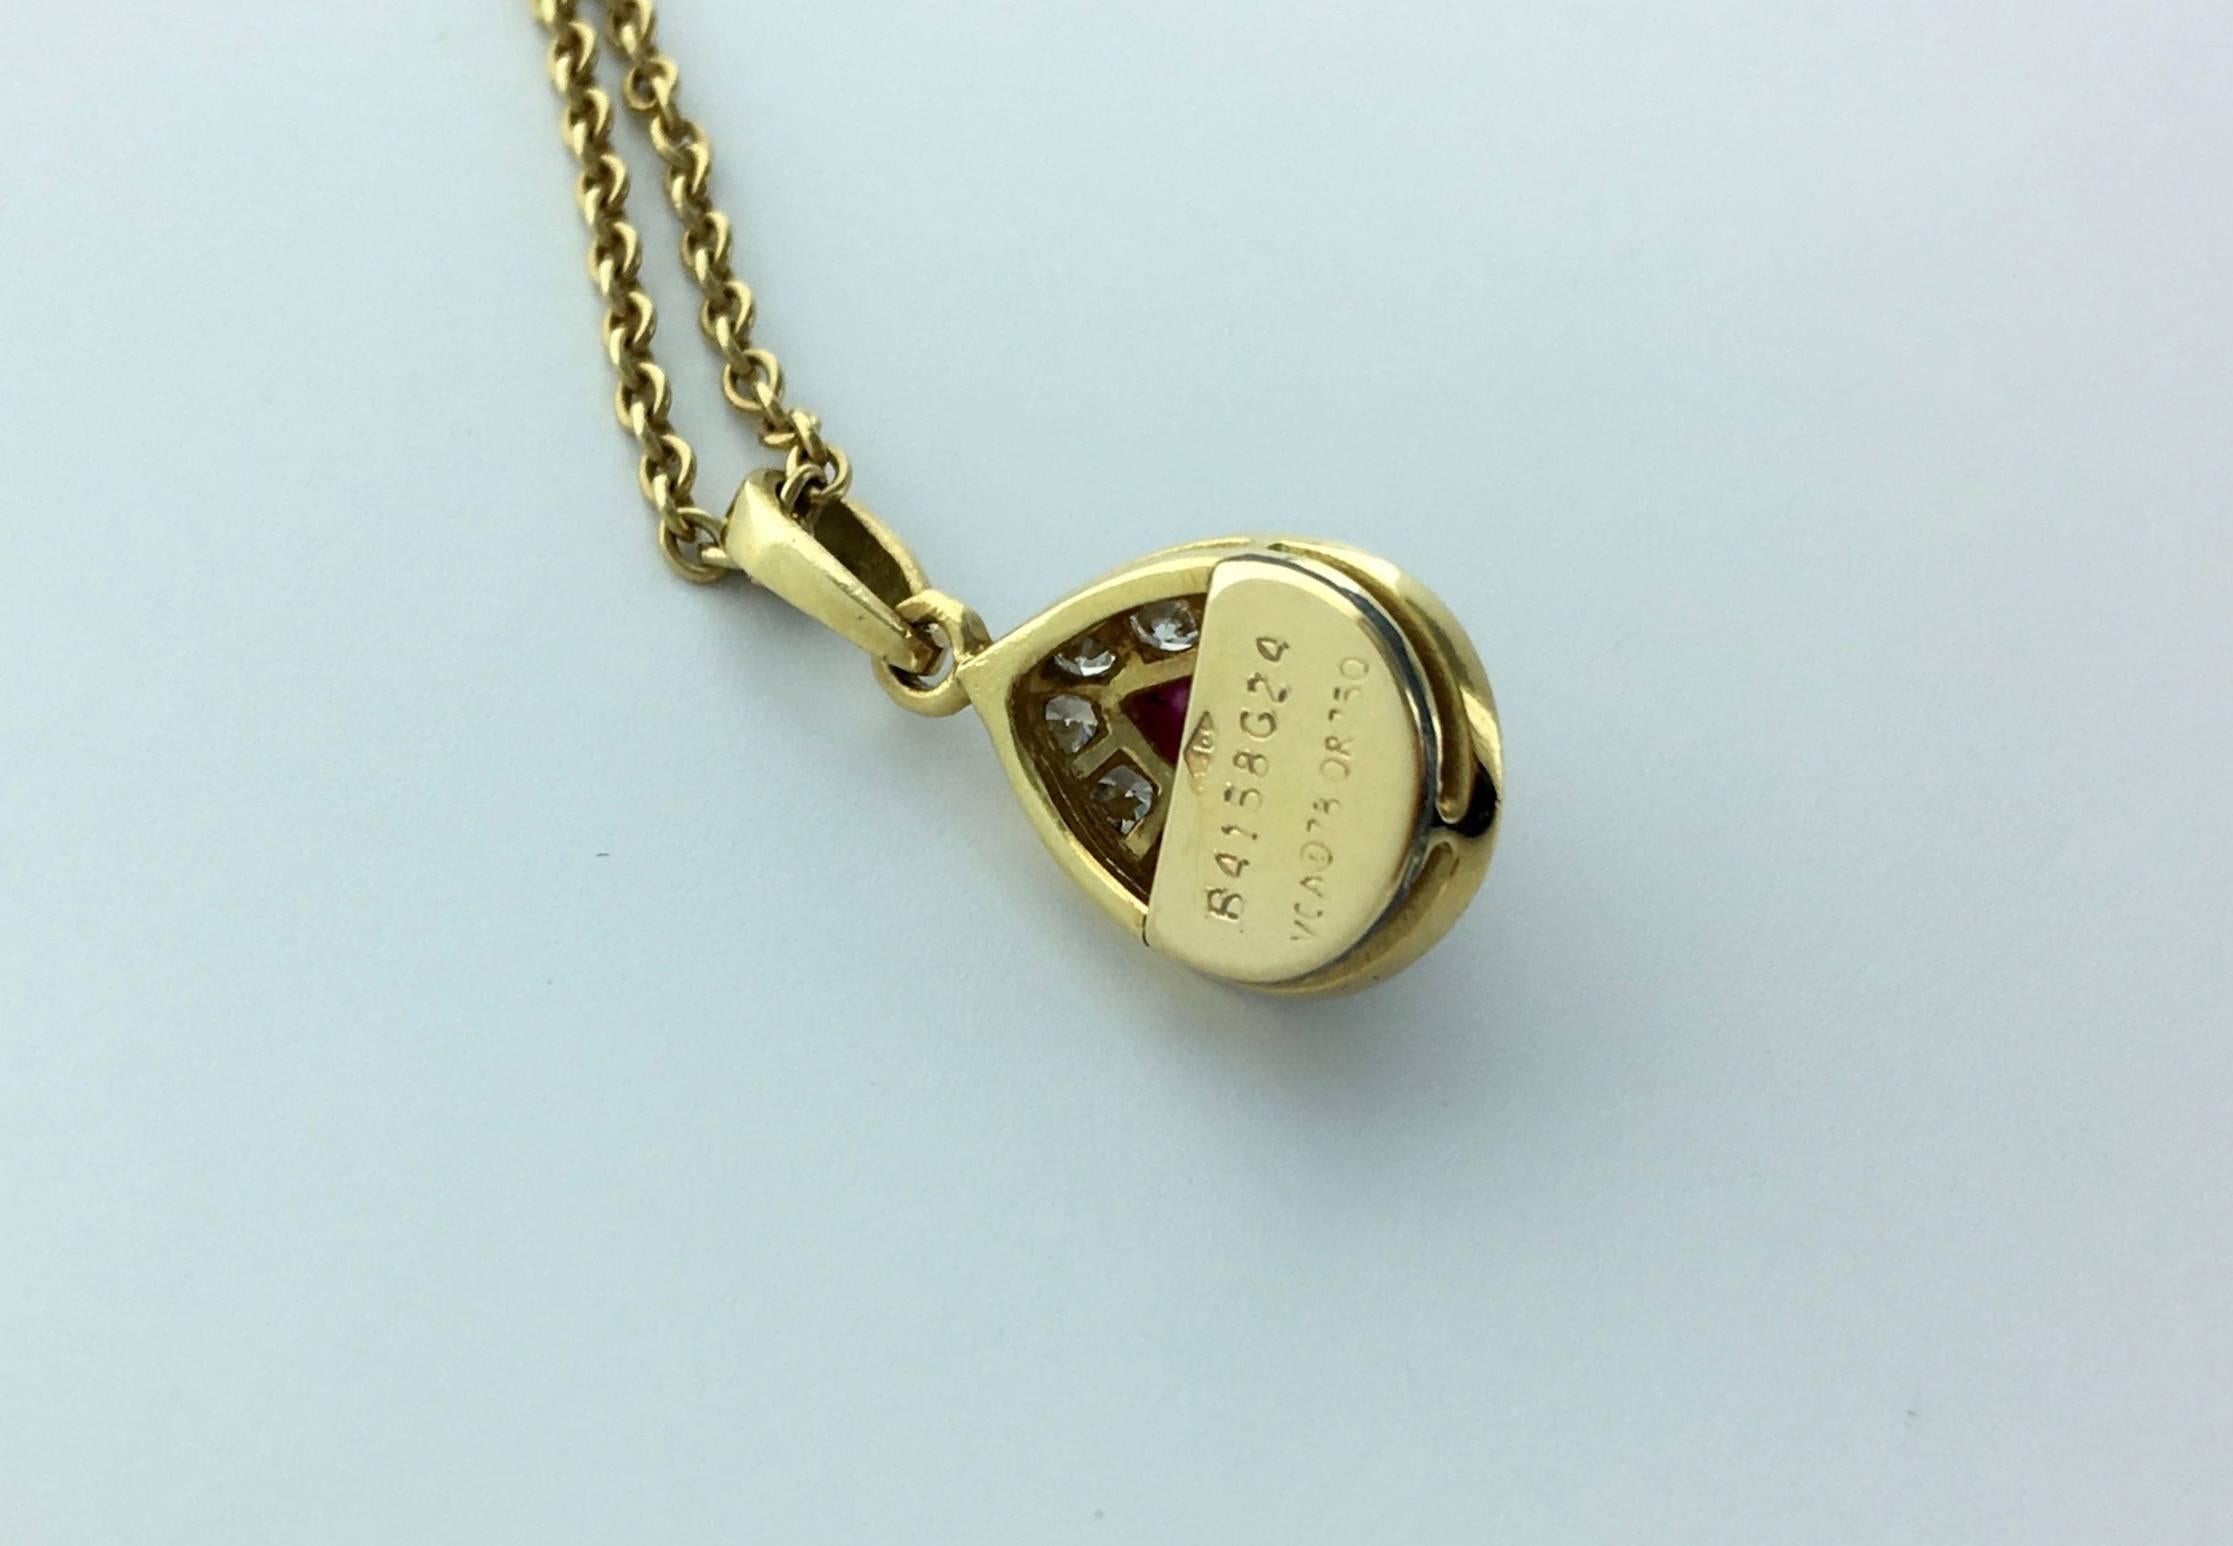 Gorgeous Van Cleef and Arpels Pendant in Yellow Gold 18k 750 centered by a cabochon Ruby surrounded by diamond.
Chain in yellow gold.
Dated 1978.

Signed, numbered and marked.